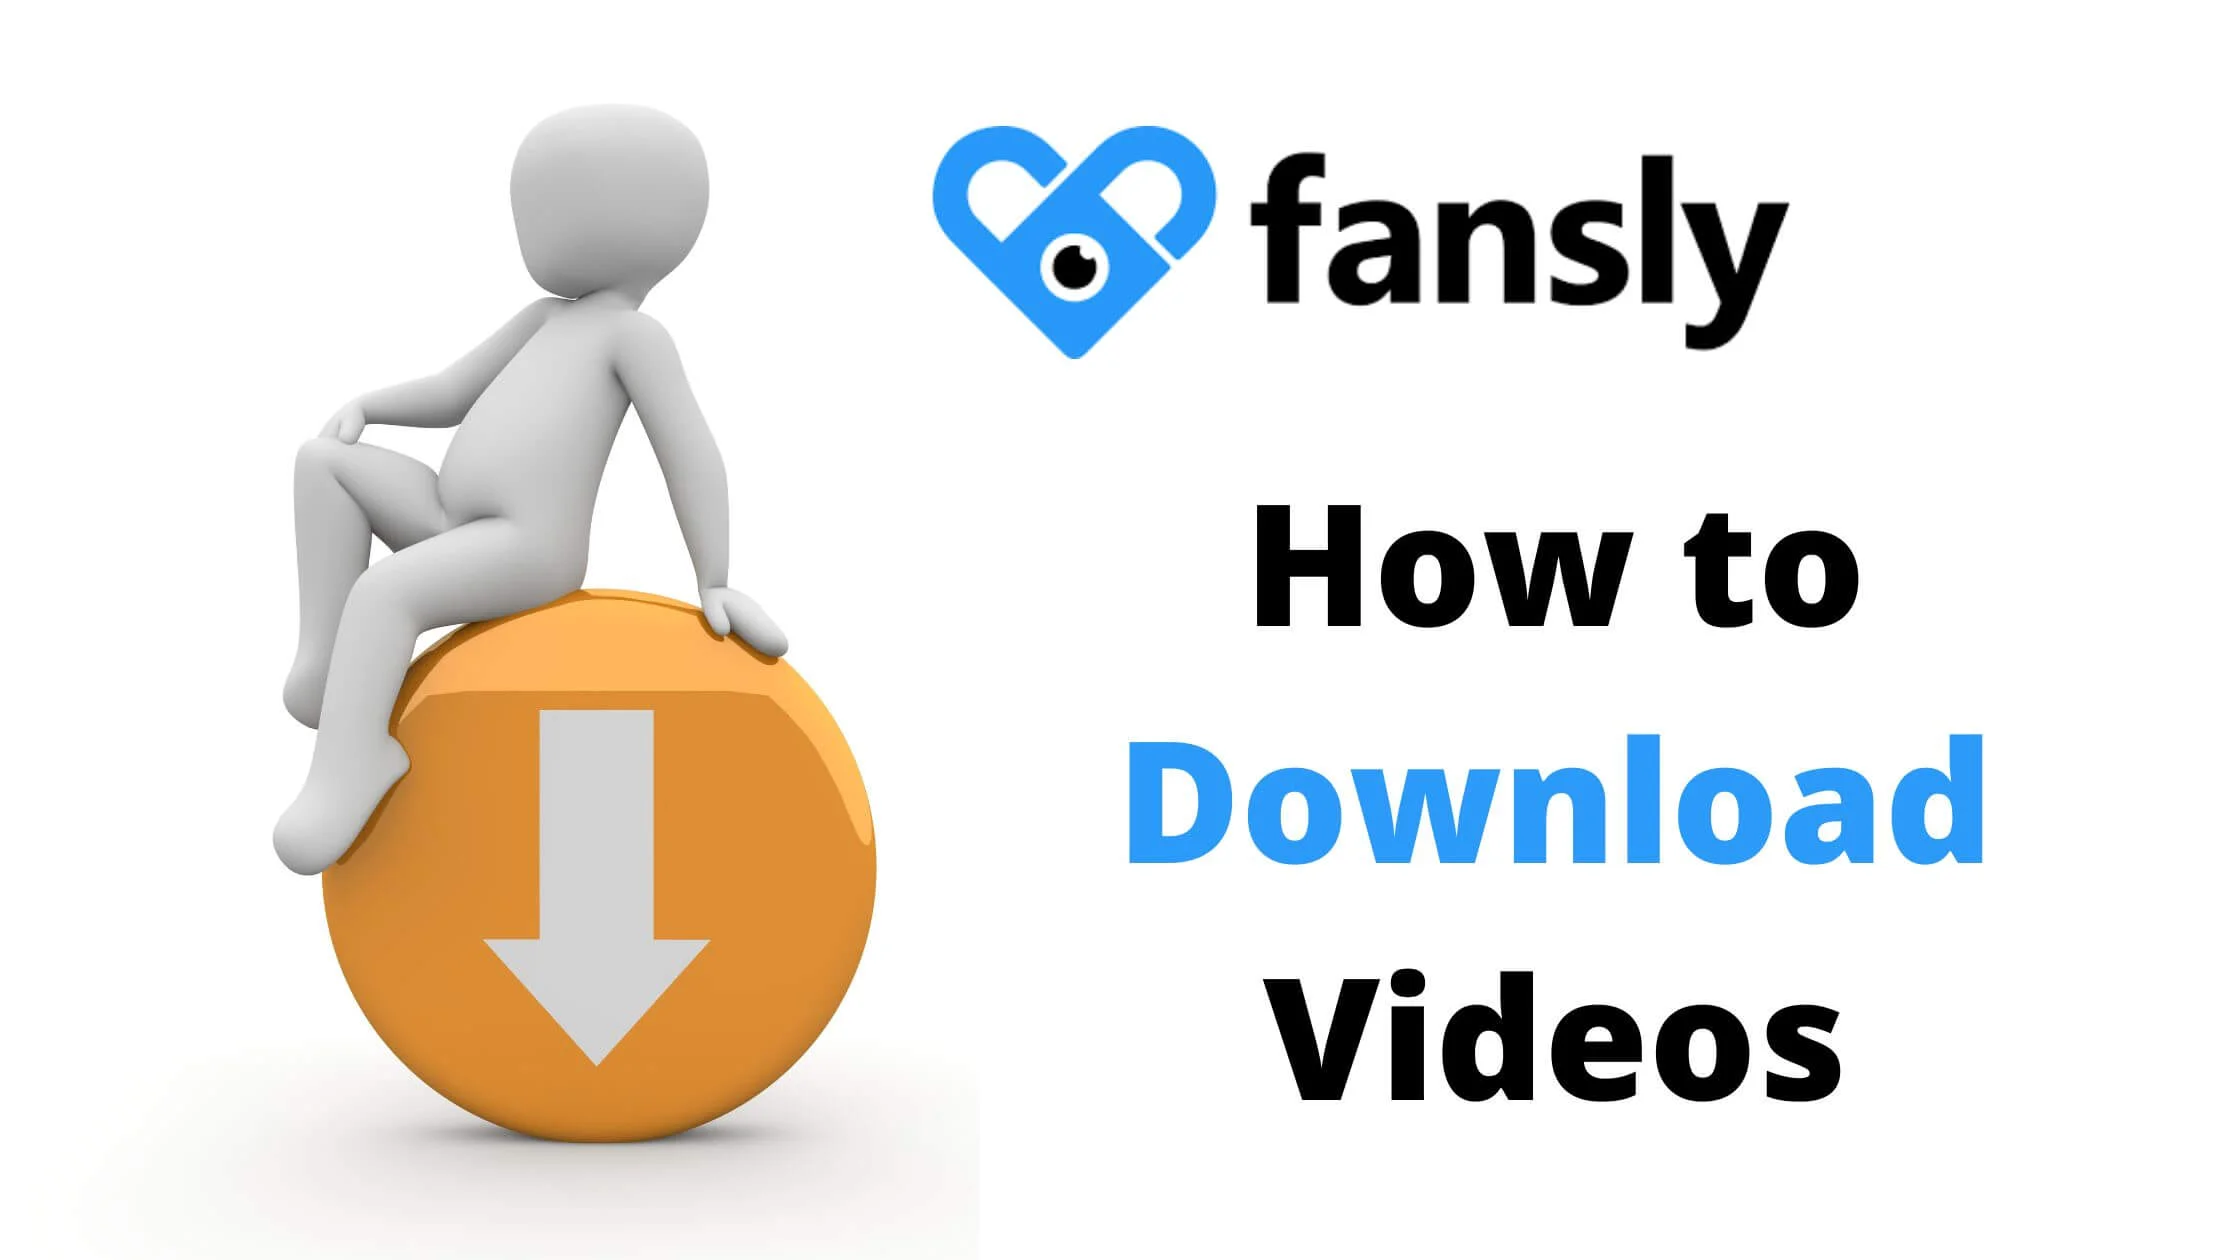 Download Videos on Fansly